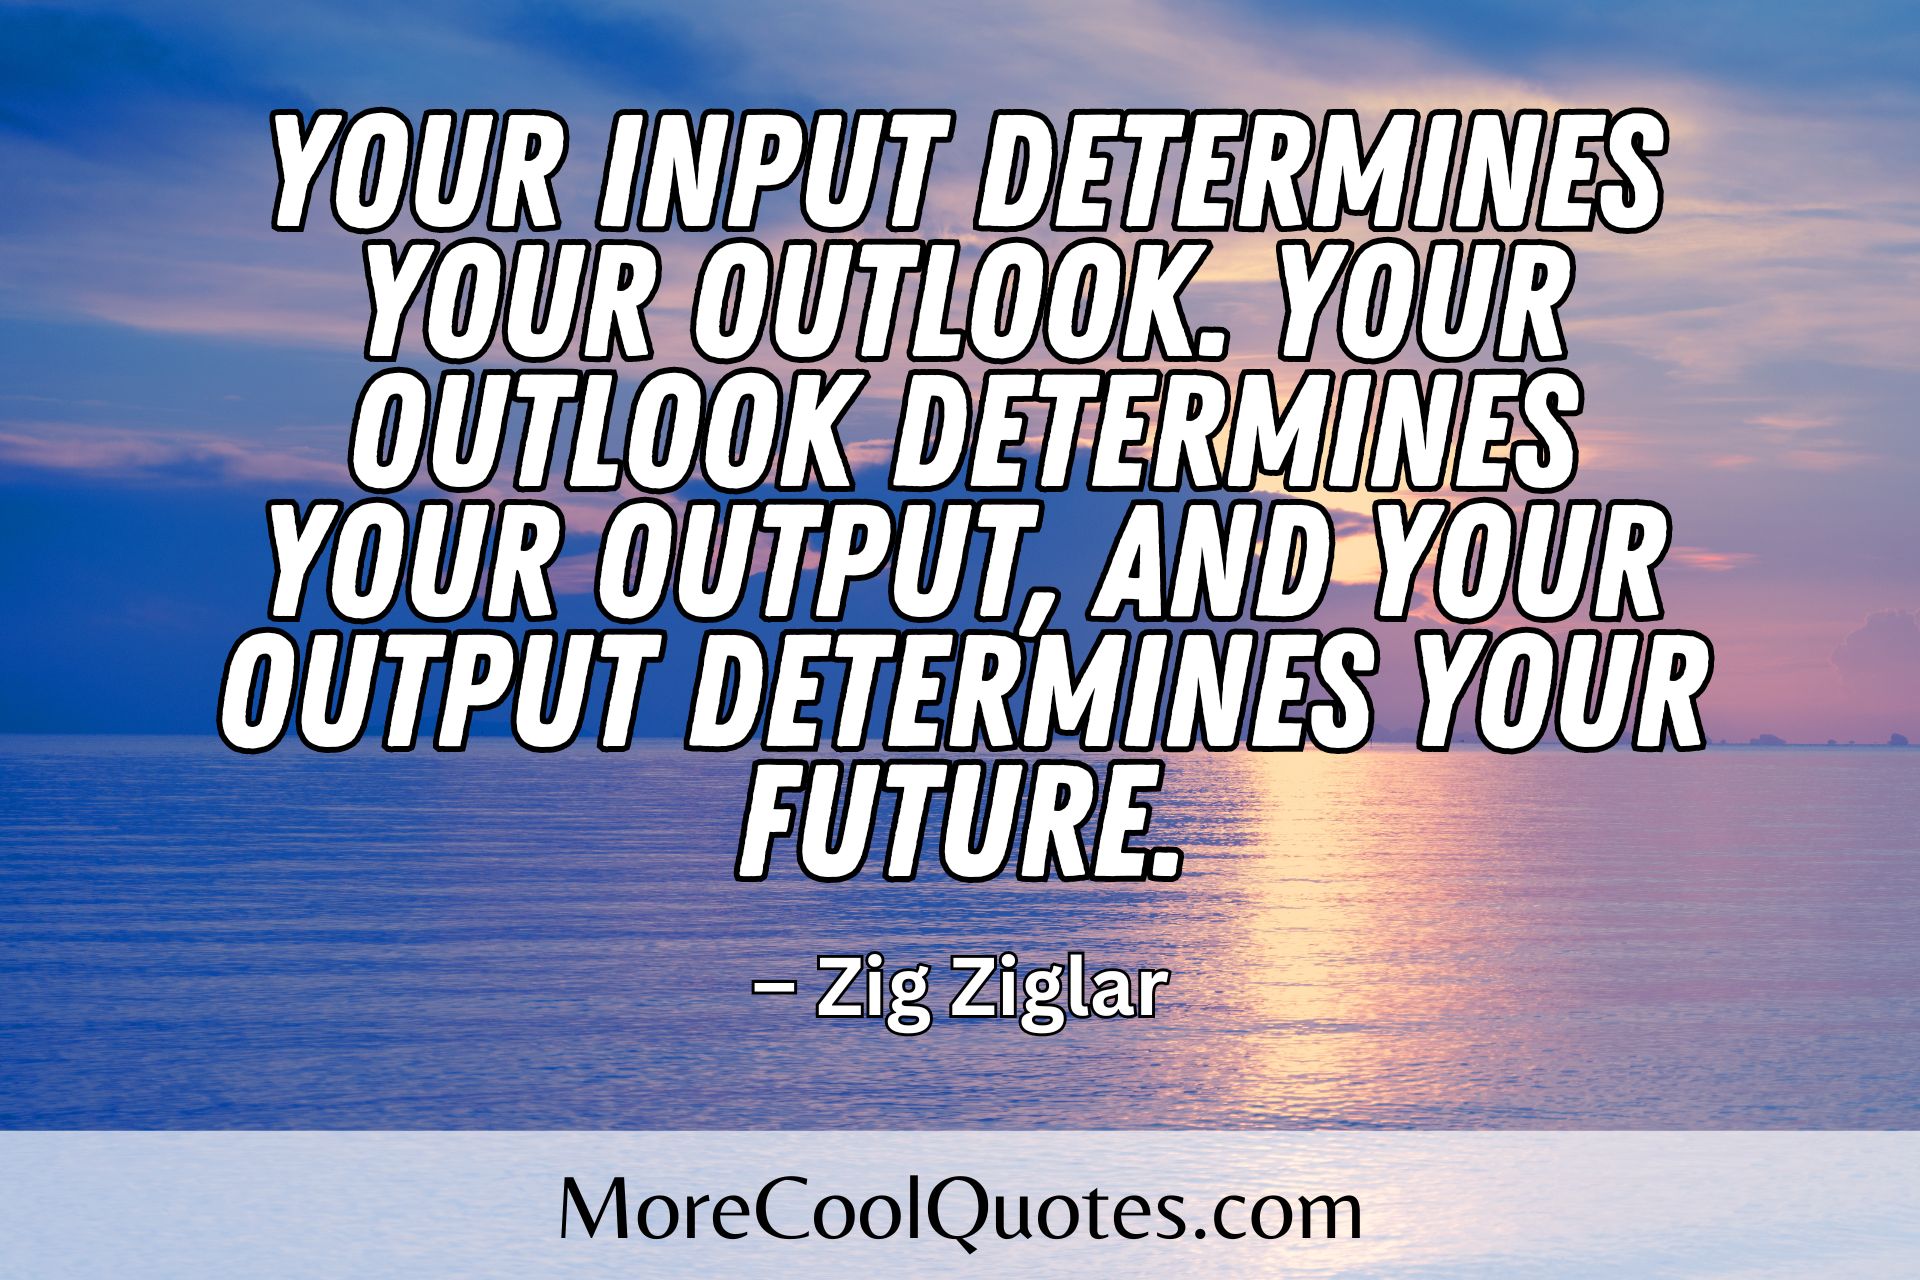 Your input determines your outlook